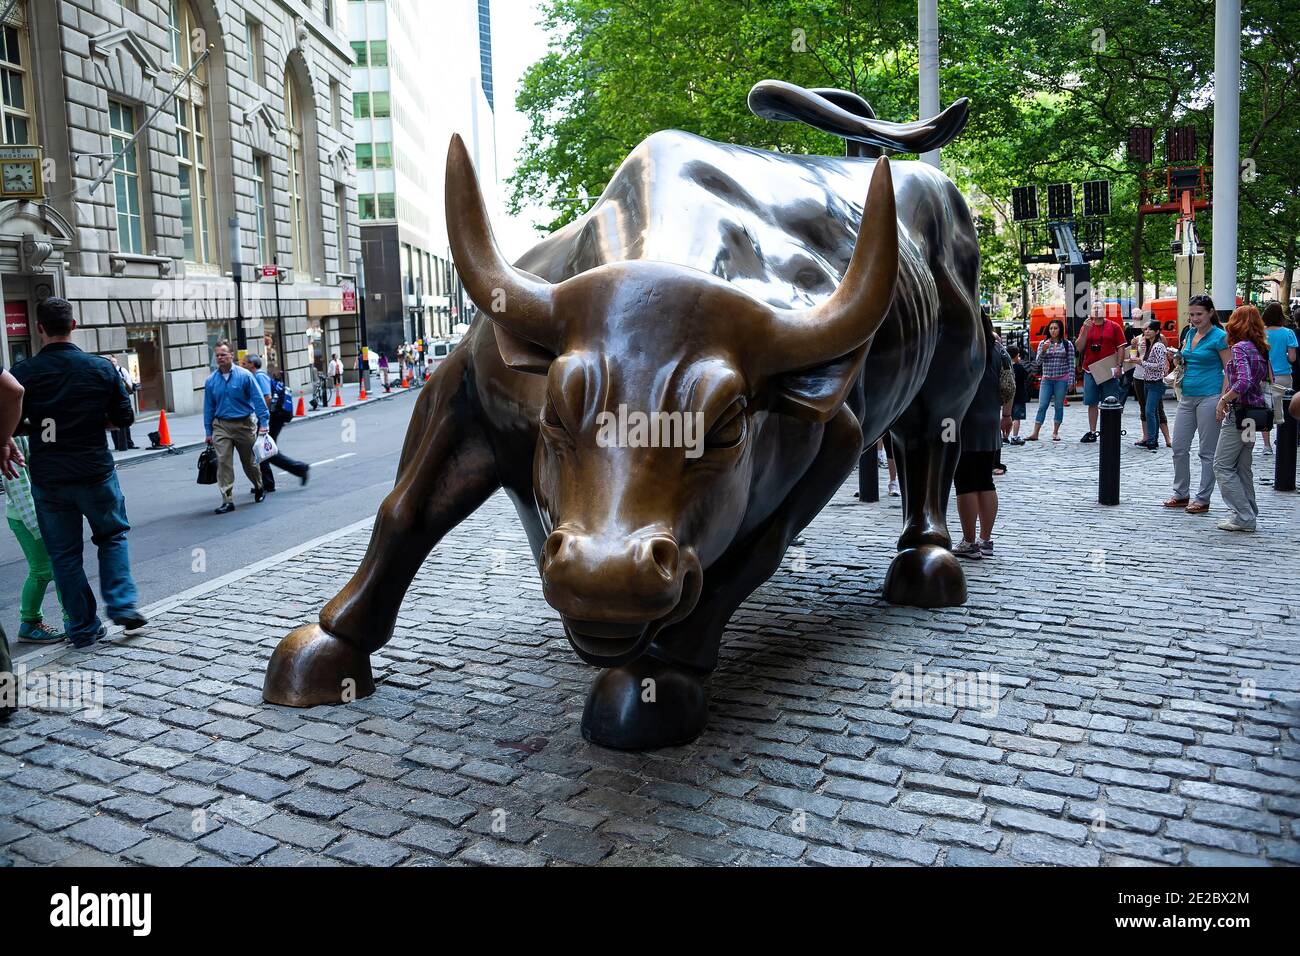 New York City New York. Sculpture of bull at New York Stock Exchange financial district. Stock Photo